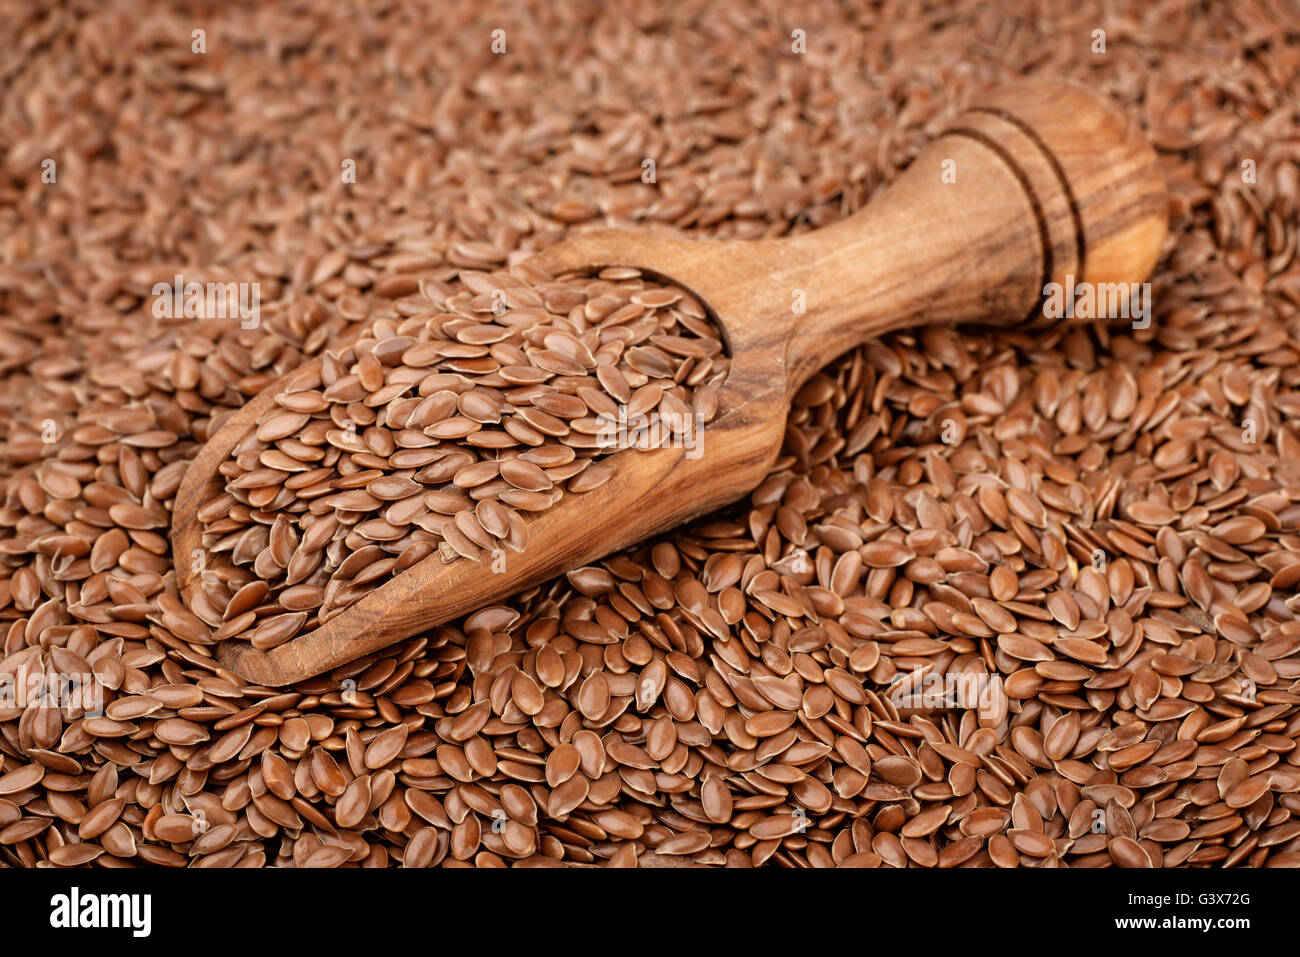 Wooden scoop with lin seeds Stock Photo